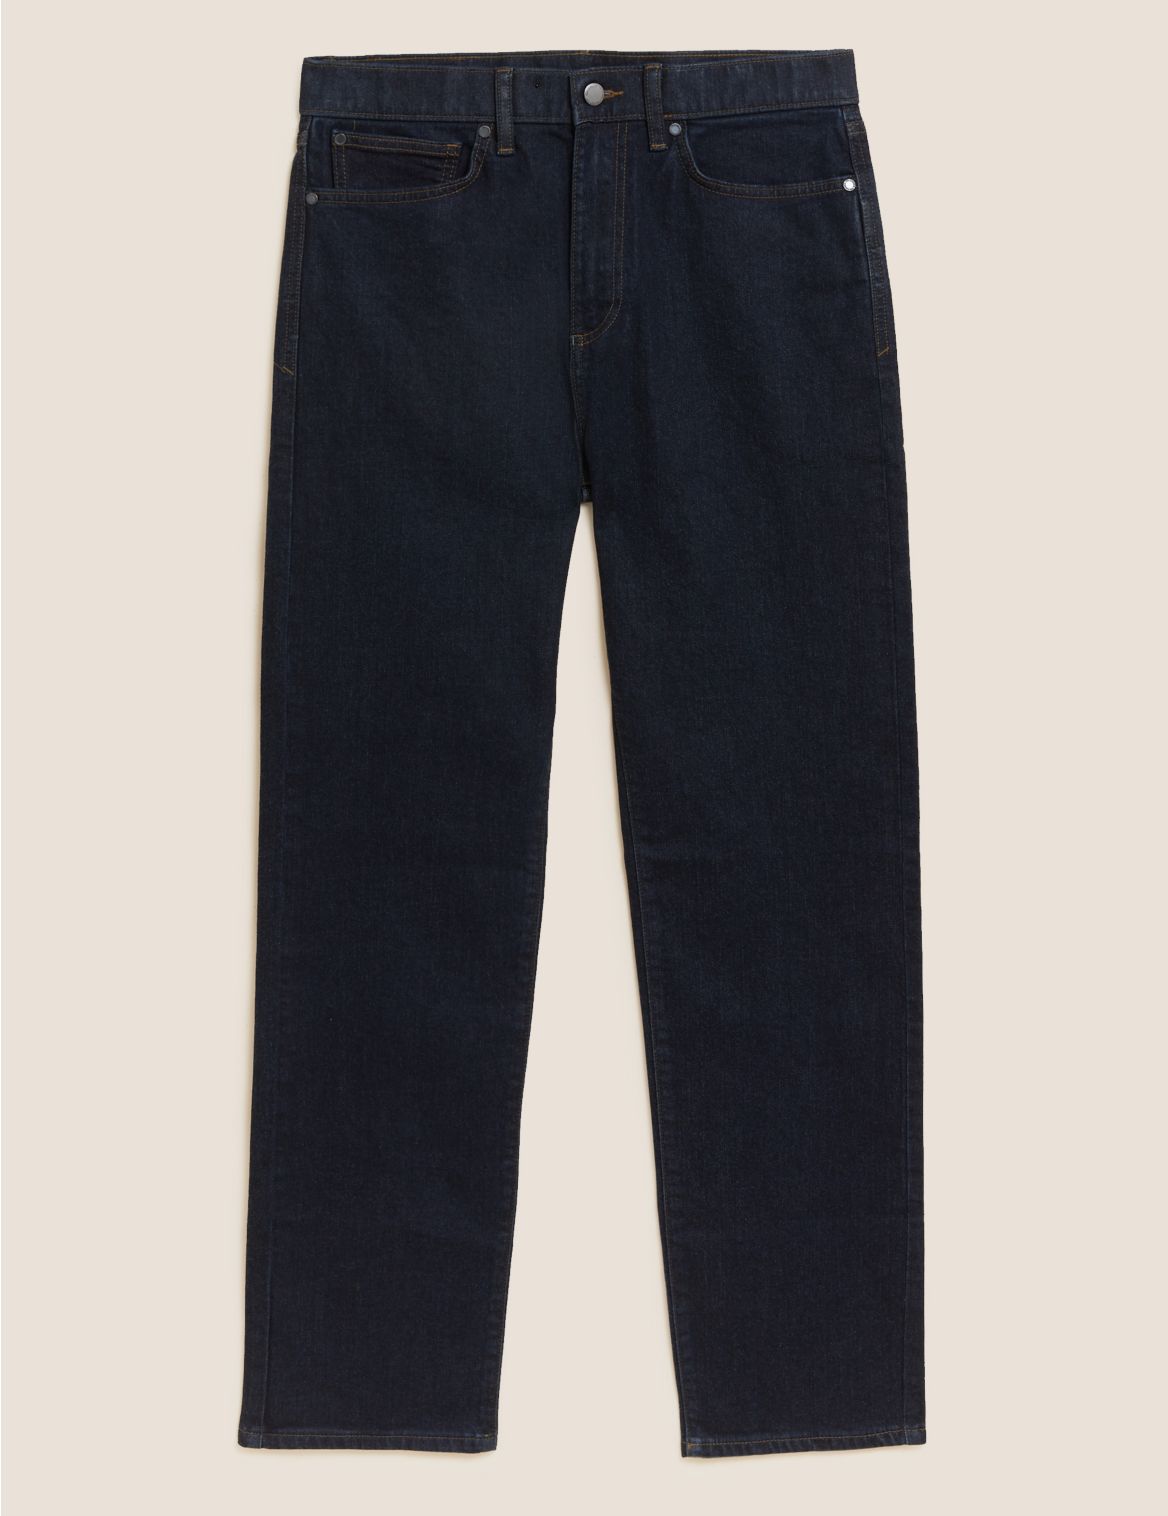 Big & Tall Regular Fit Stretch Jeans with Stormwear&trade; navy